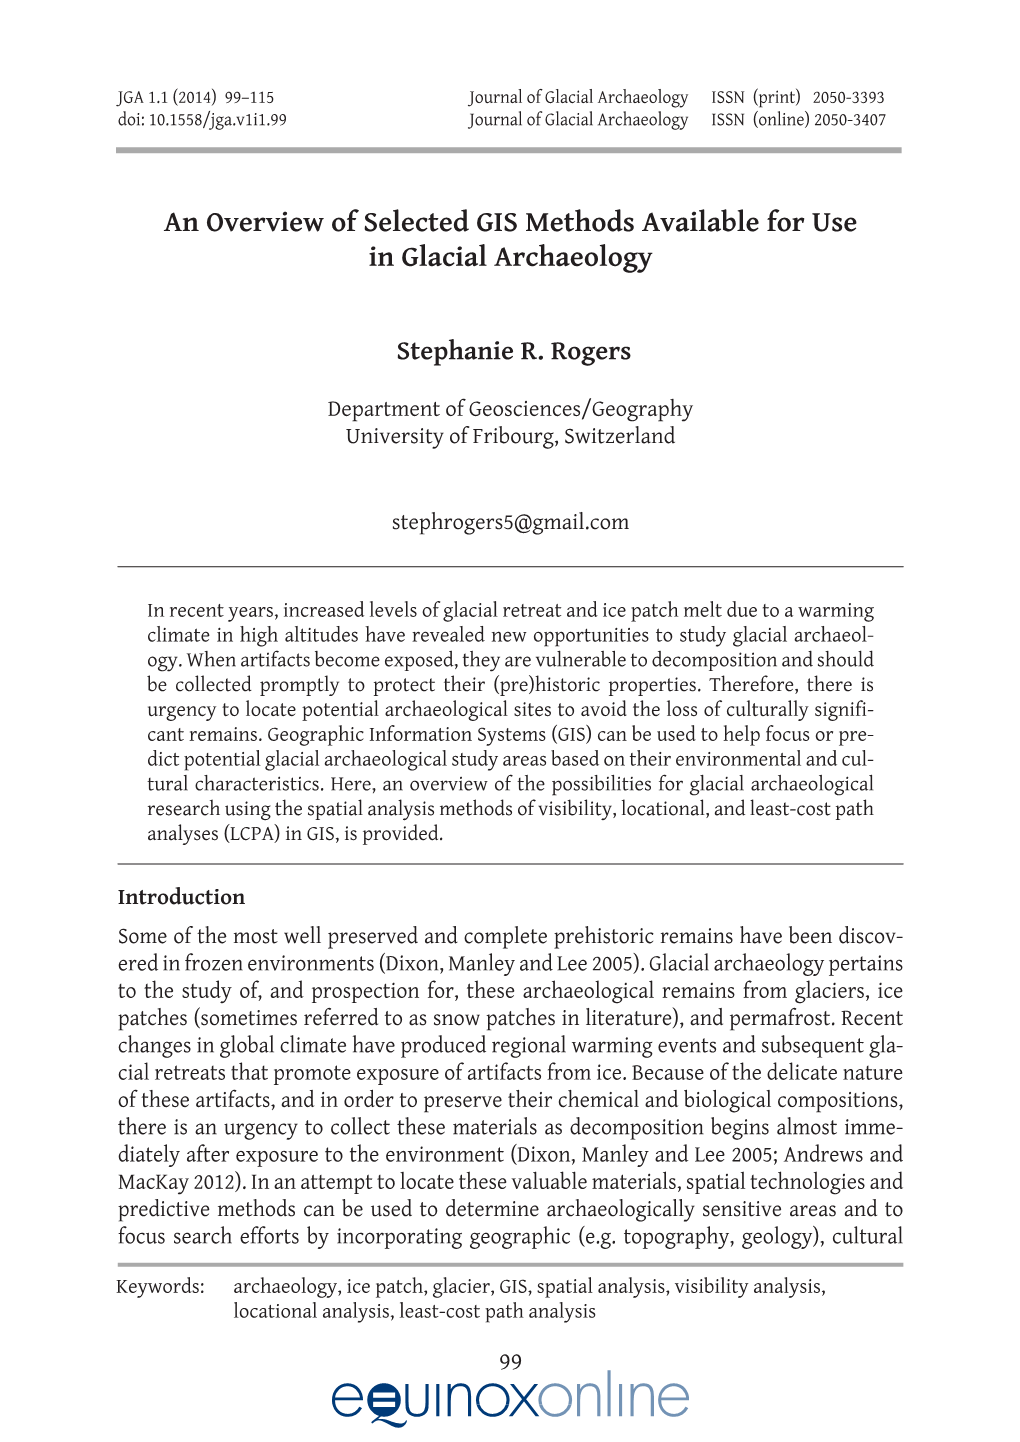 An Overview of Selected GIS Methods Available for Use in Glacial Archaeology